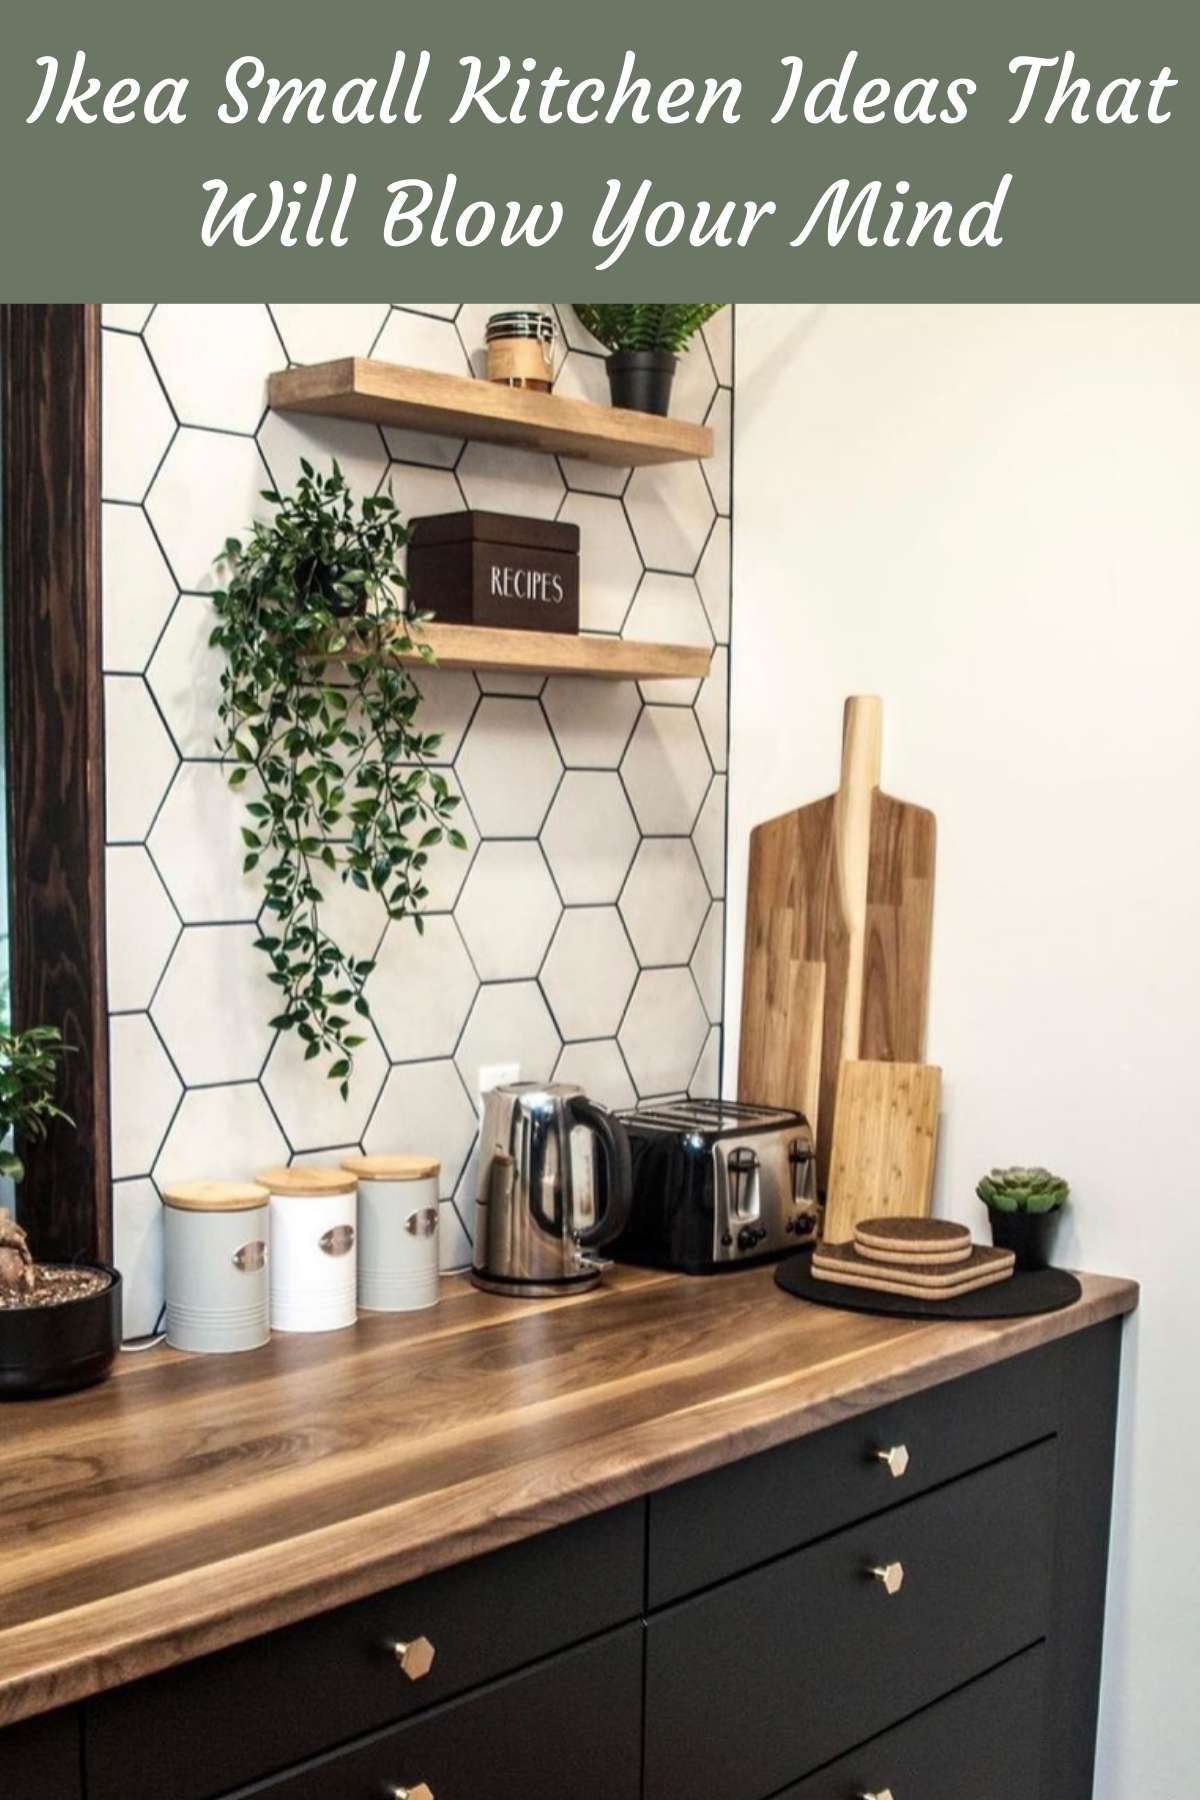 Ikea Small Kitchen Ideas That Will Blow Your Mind. Cute kitchen with plant.